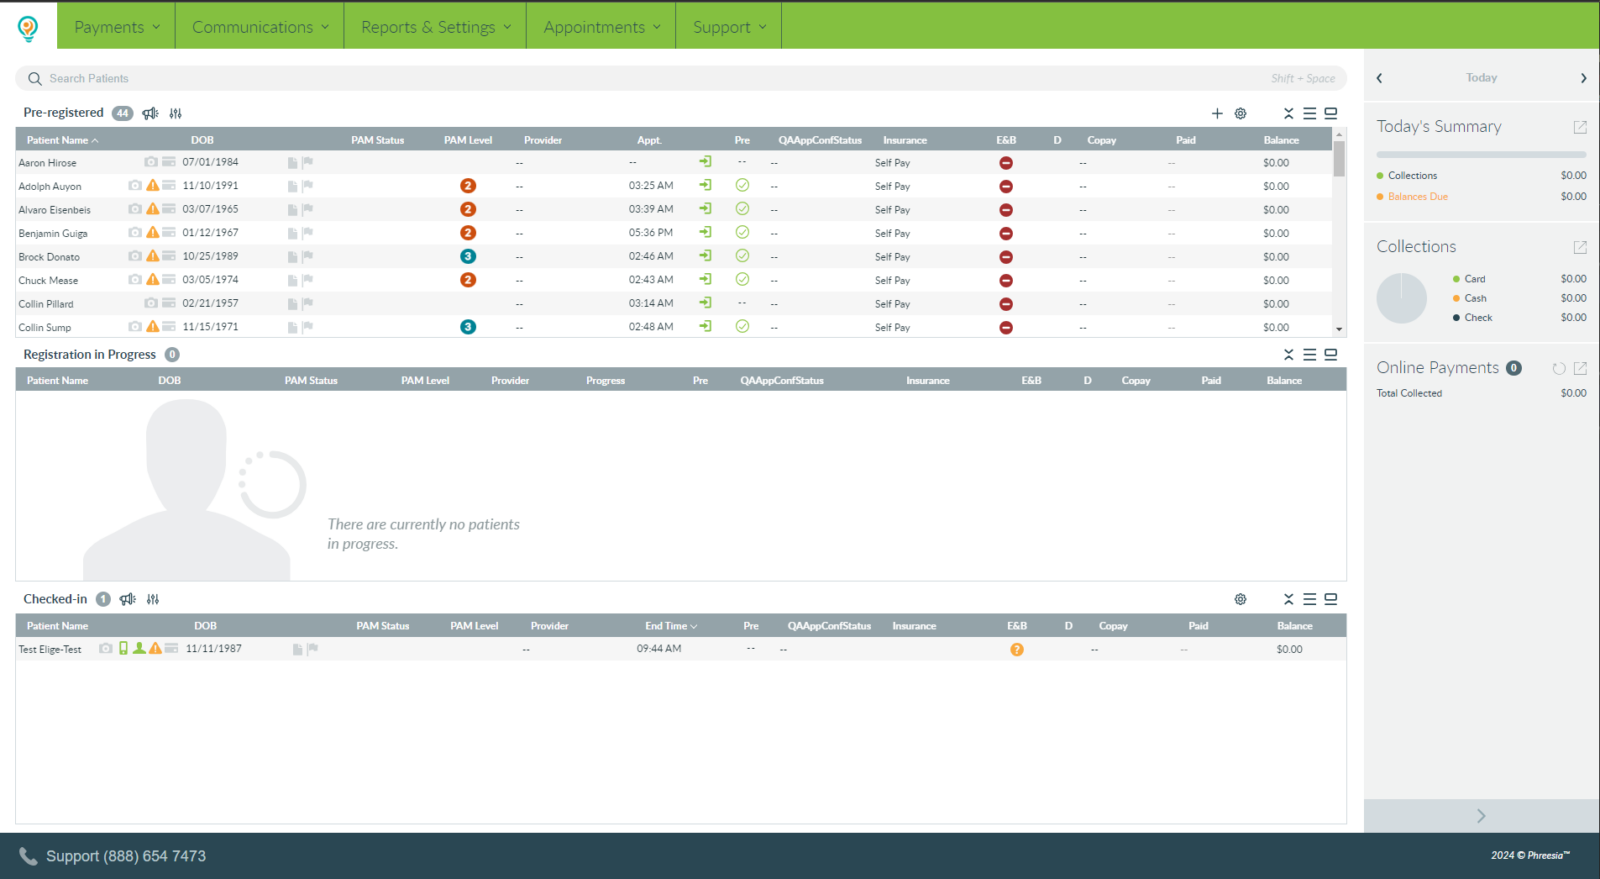 A screenshot of the dashboard including the PAM column.